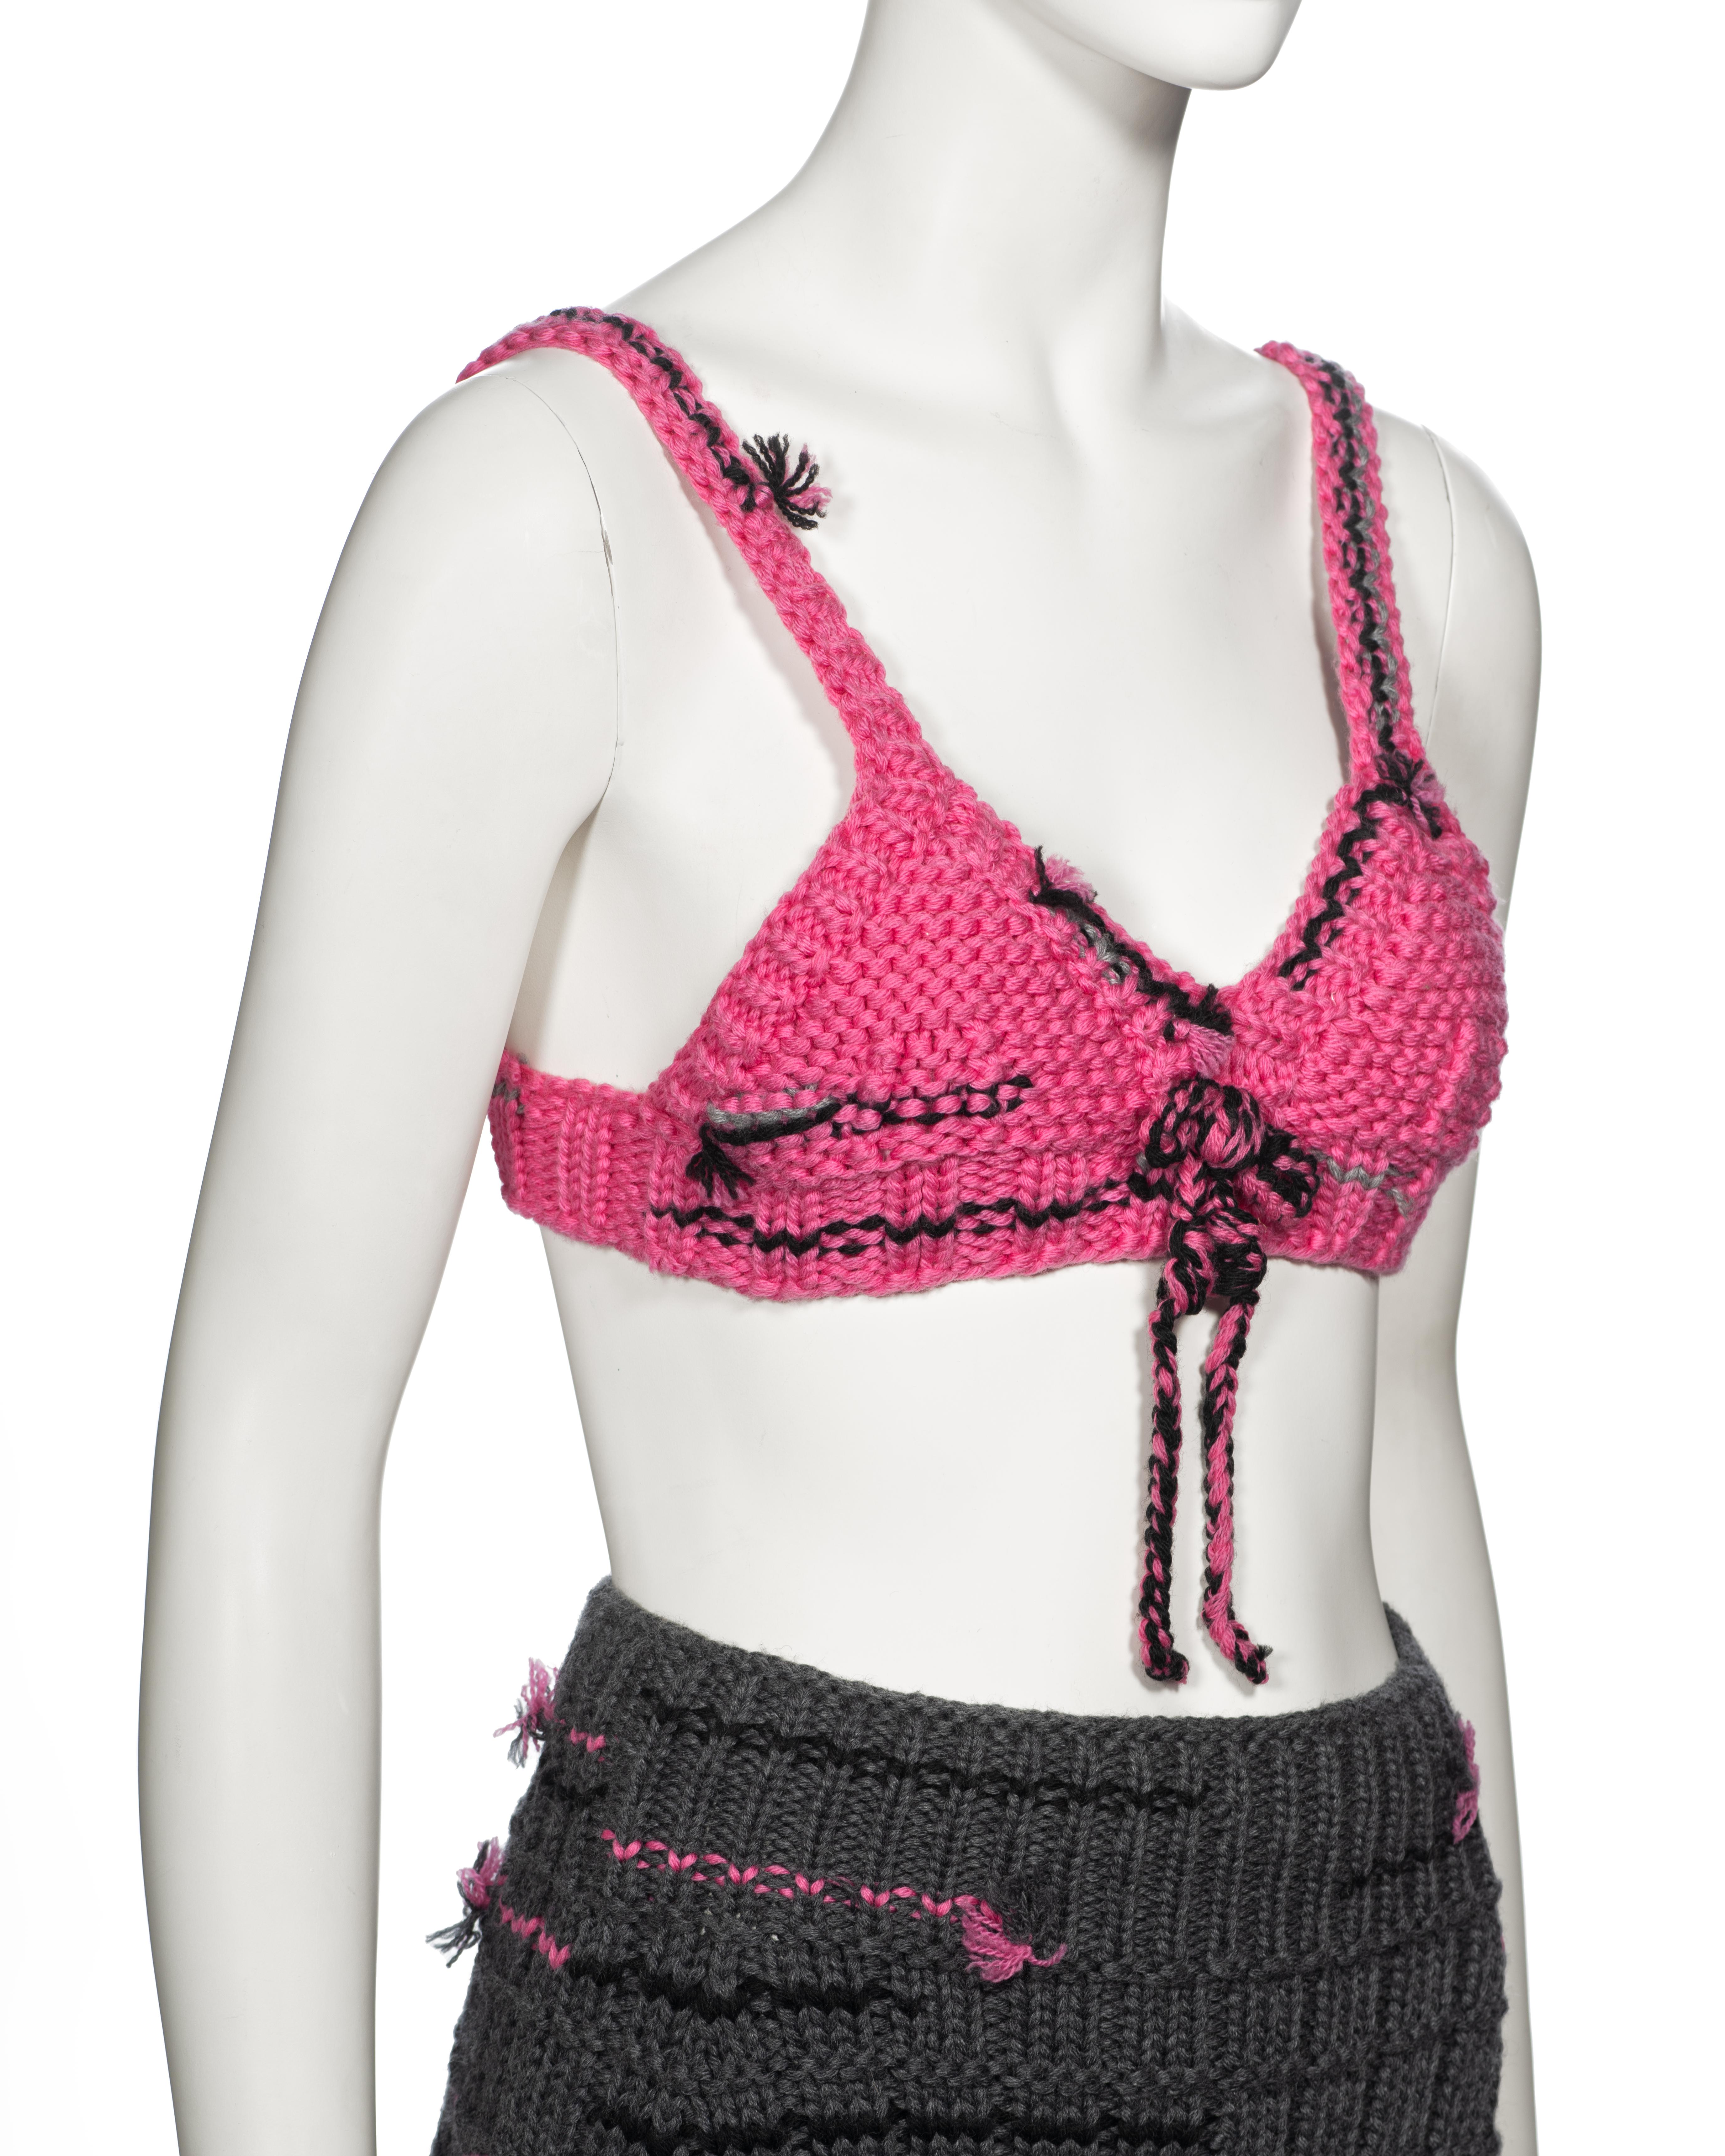 Prada by Miuccia Prada Pink and Grey Knitted Bra and Mini Skirt Set, fw 2017 For Sale 2